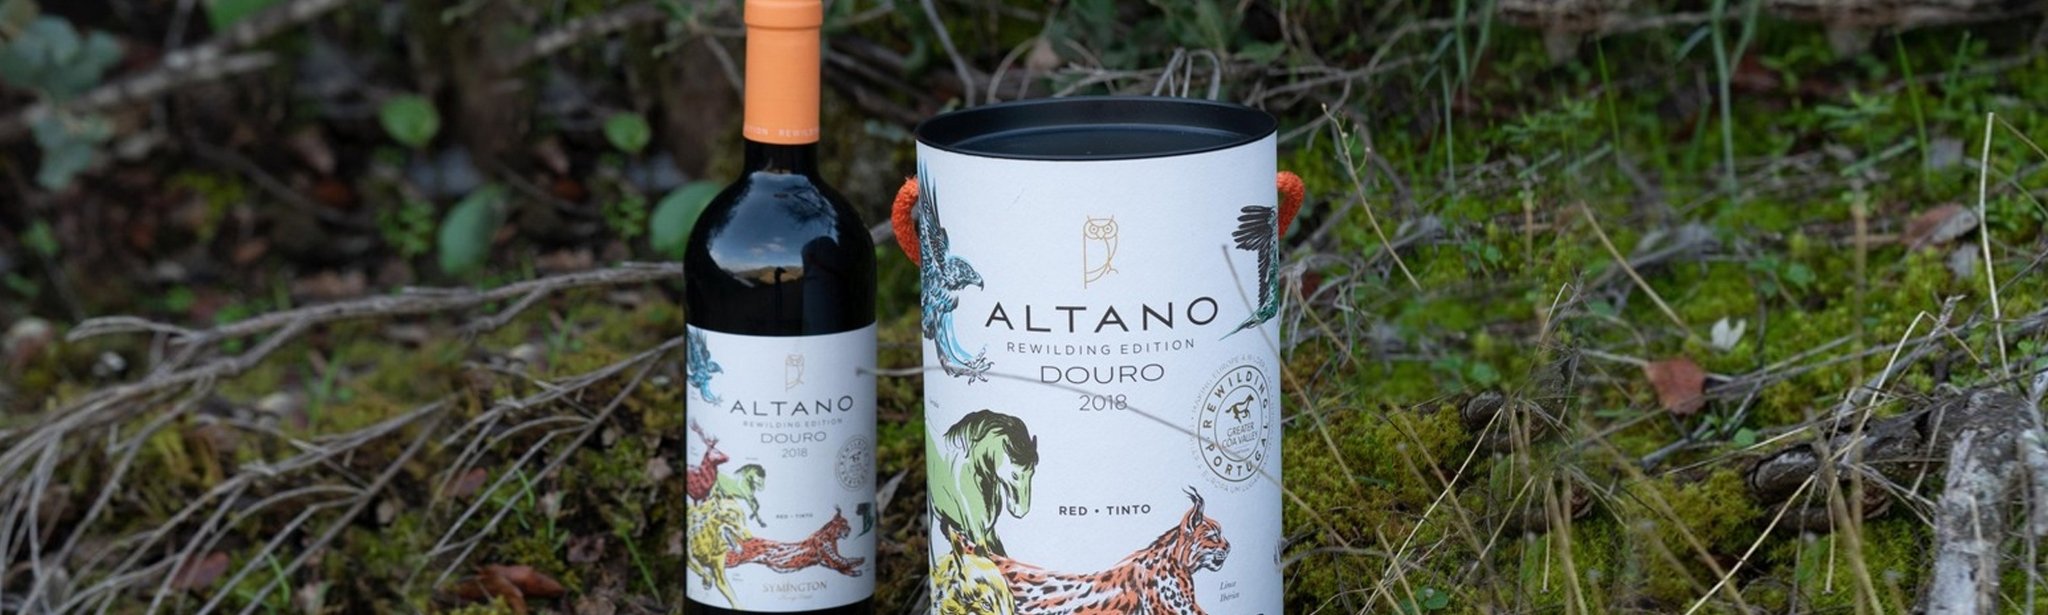 Altano - The Bottle Club